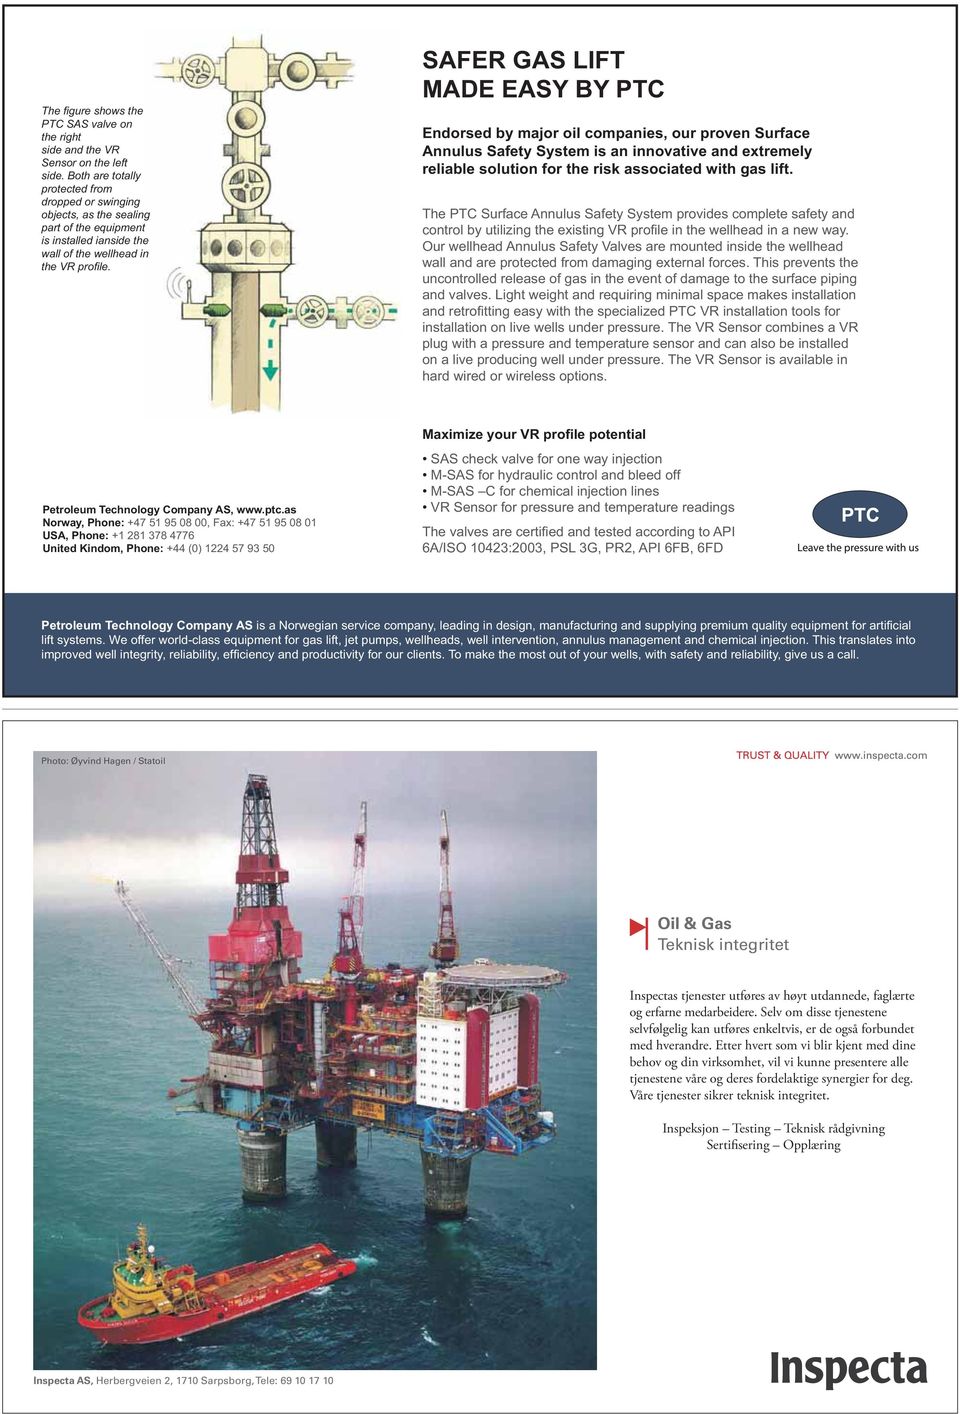 SAFER GAS LIFT MADE EASY BY PTC Endorsed by major oil companies, our proven Surface Annulus Safety System is an innovative and extremely reliable solution for the risk associated with gas lift.